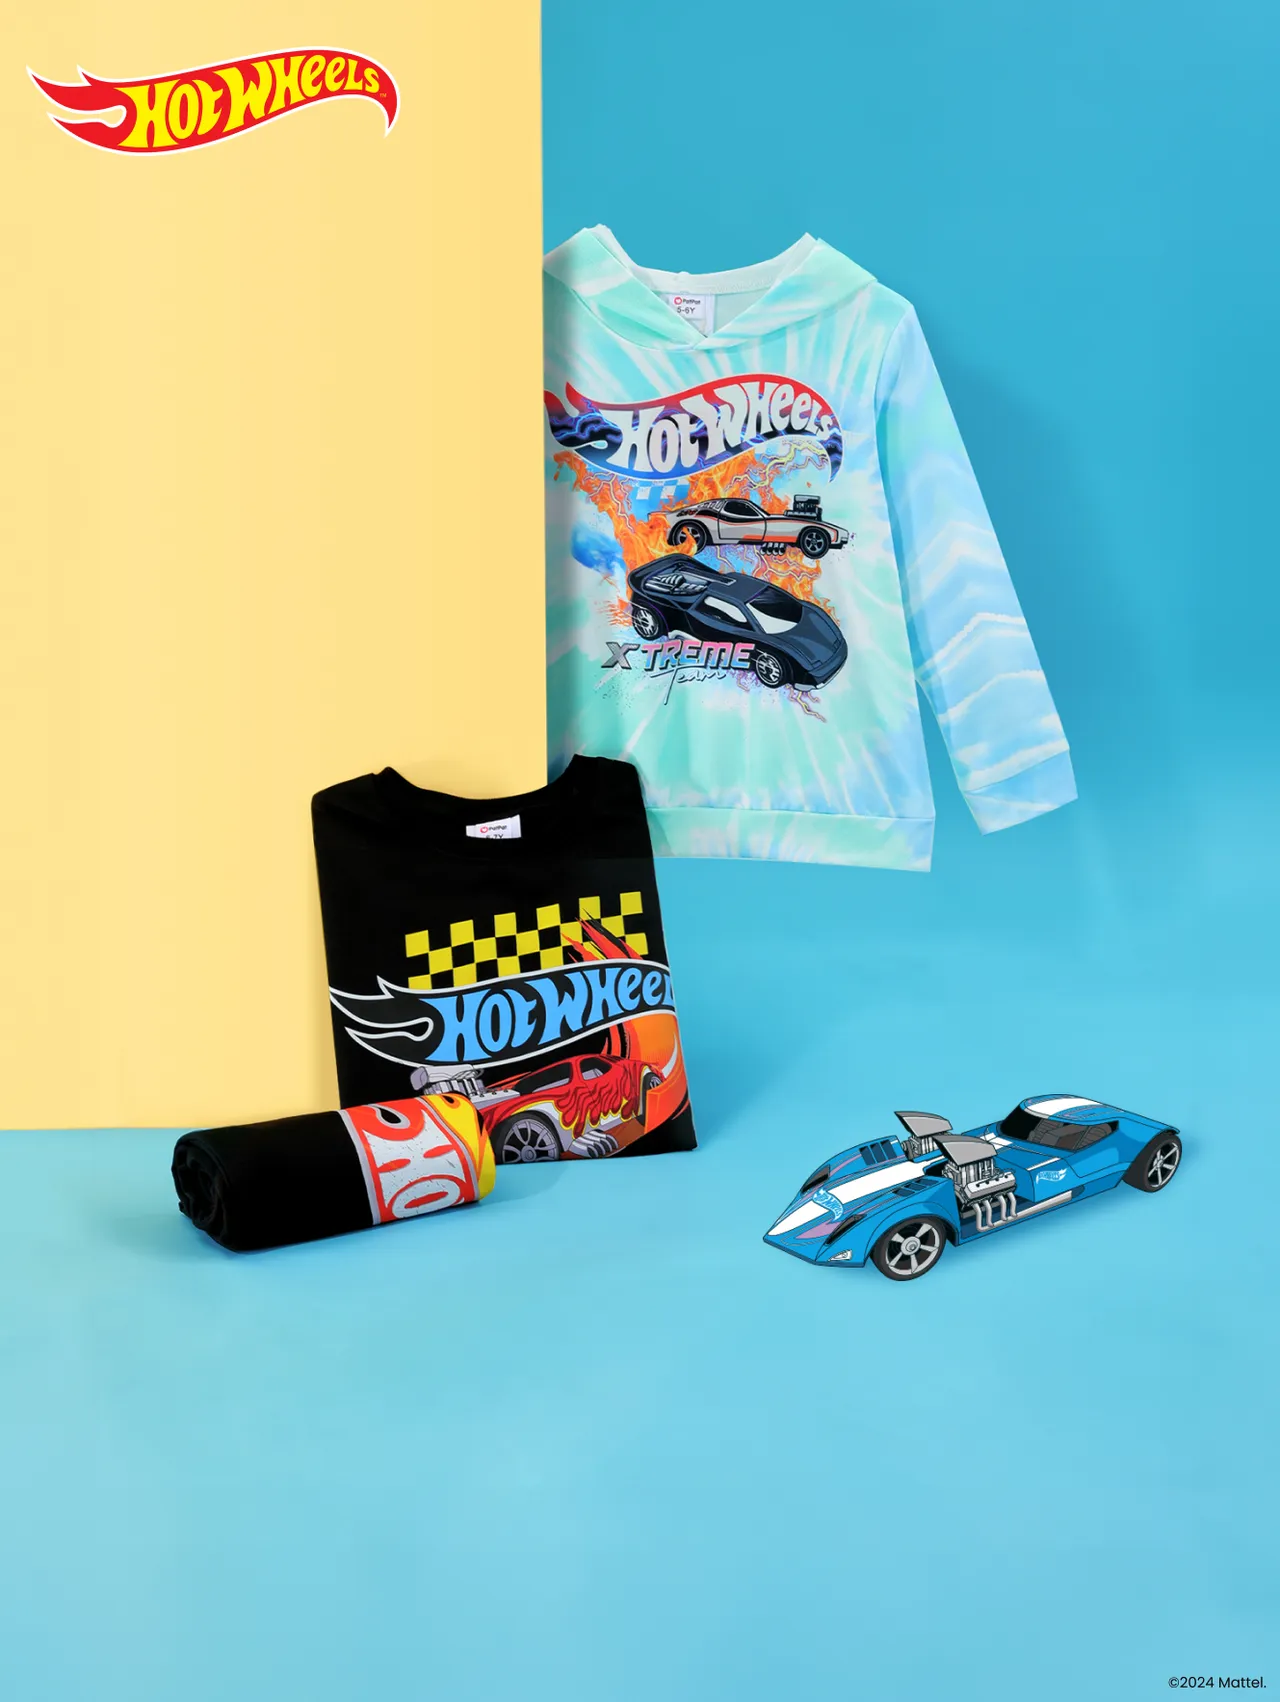 Click it to join Hot Wheels Boys’ Fashion activity